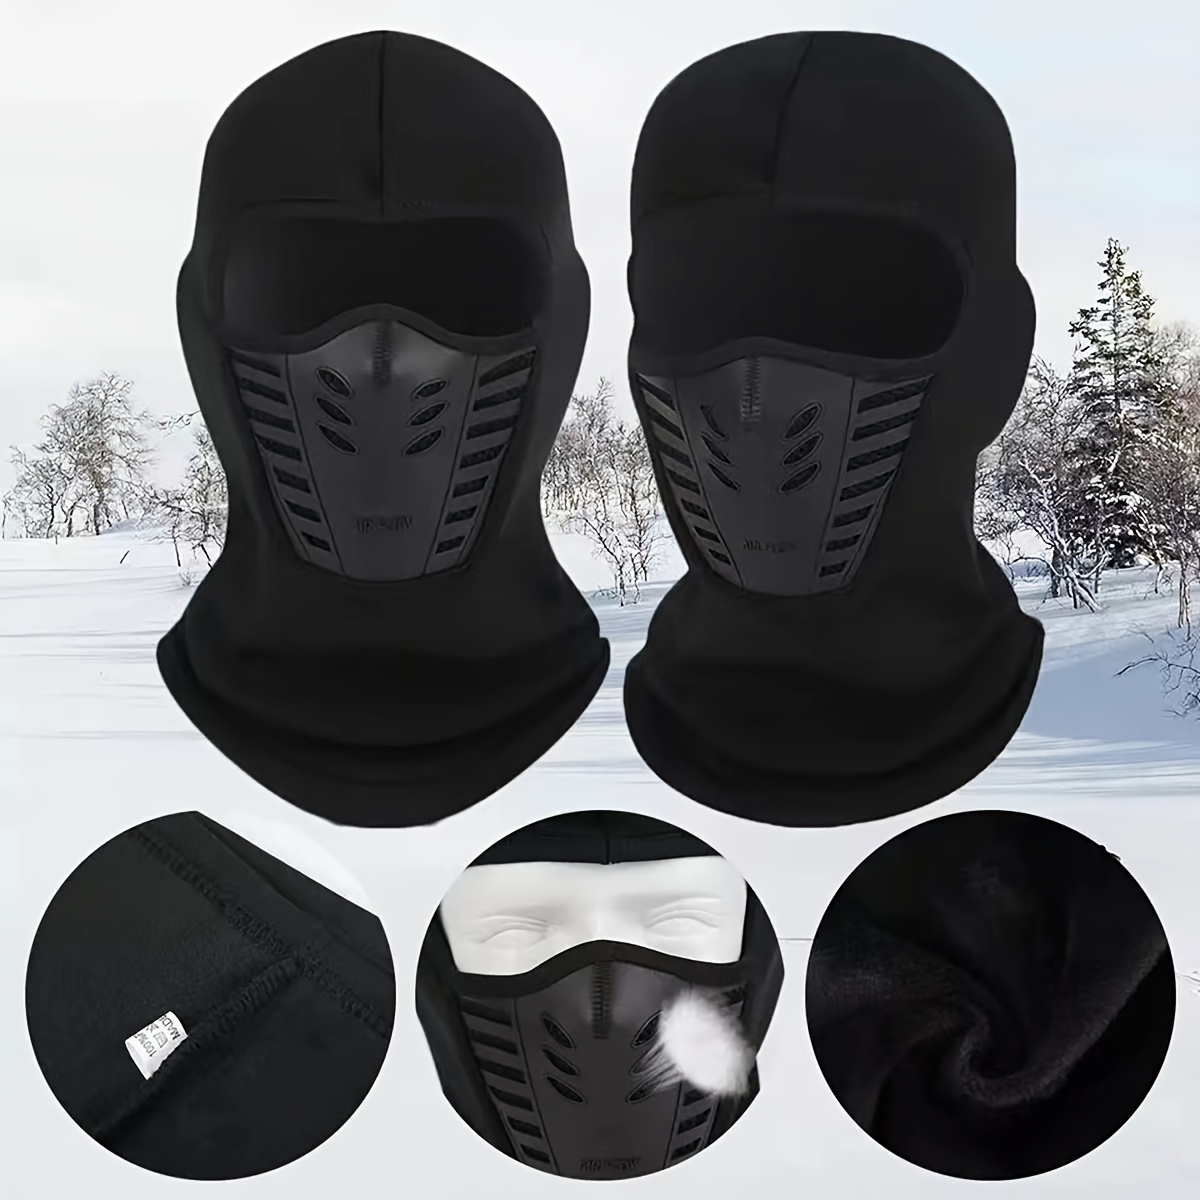 

Stay Warm And Protected This Winter With This Fleece Balaclava Face Mask!